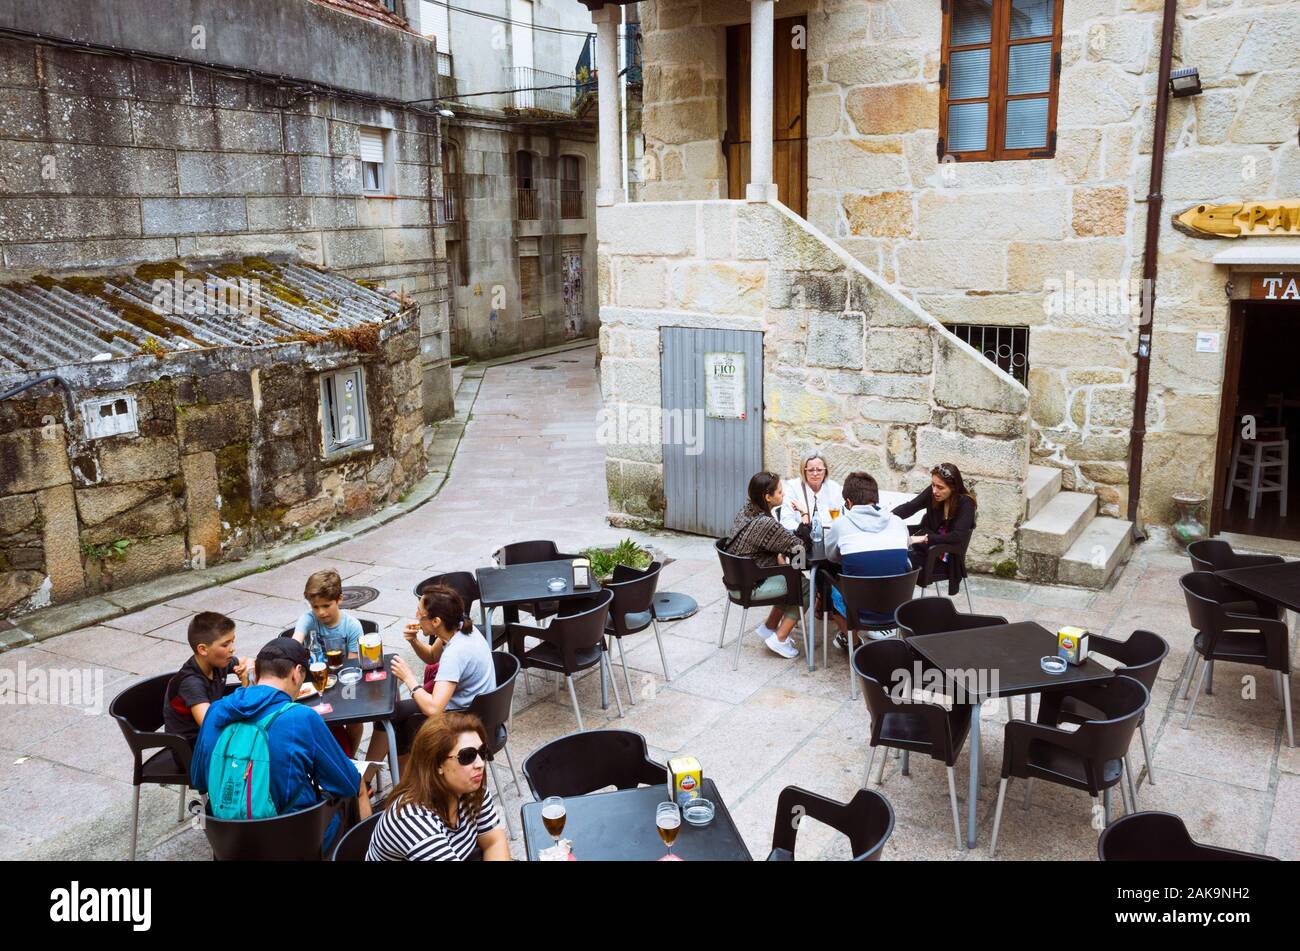 Cangas de Morrazo, Vigo, Spain : People relax at an outdoors cafe in the old town of Cangas. Stock Photo